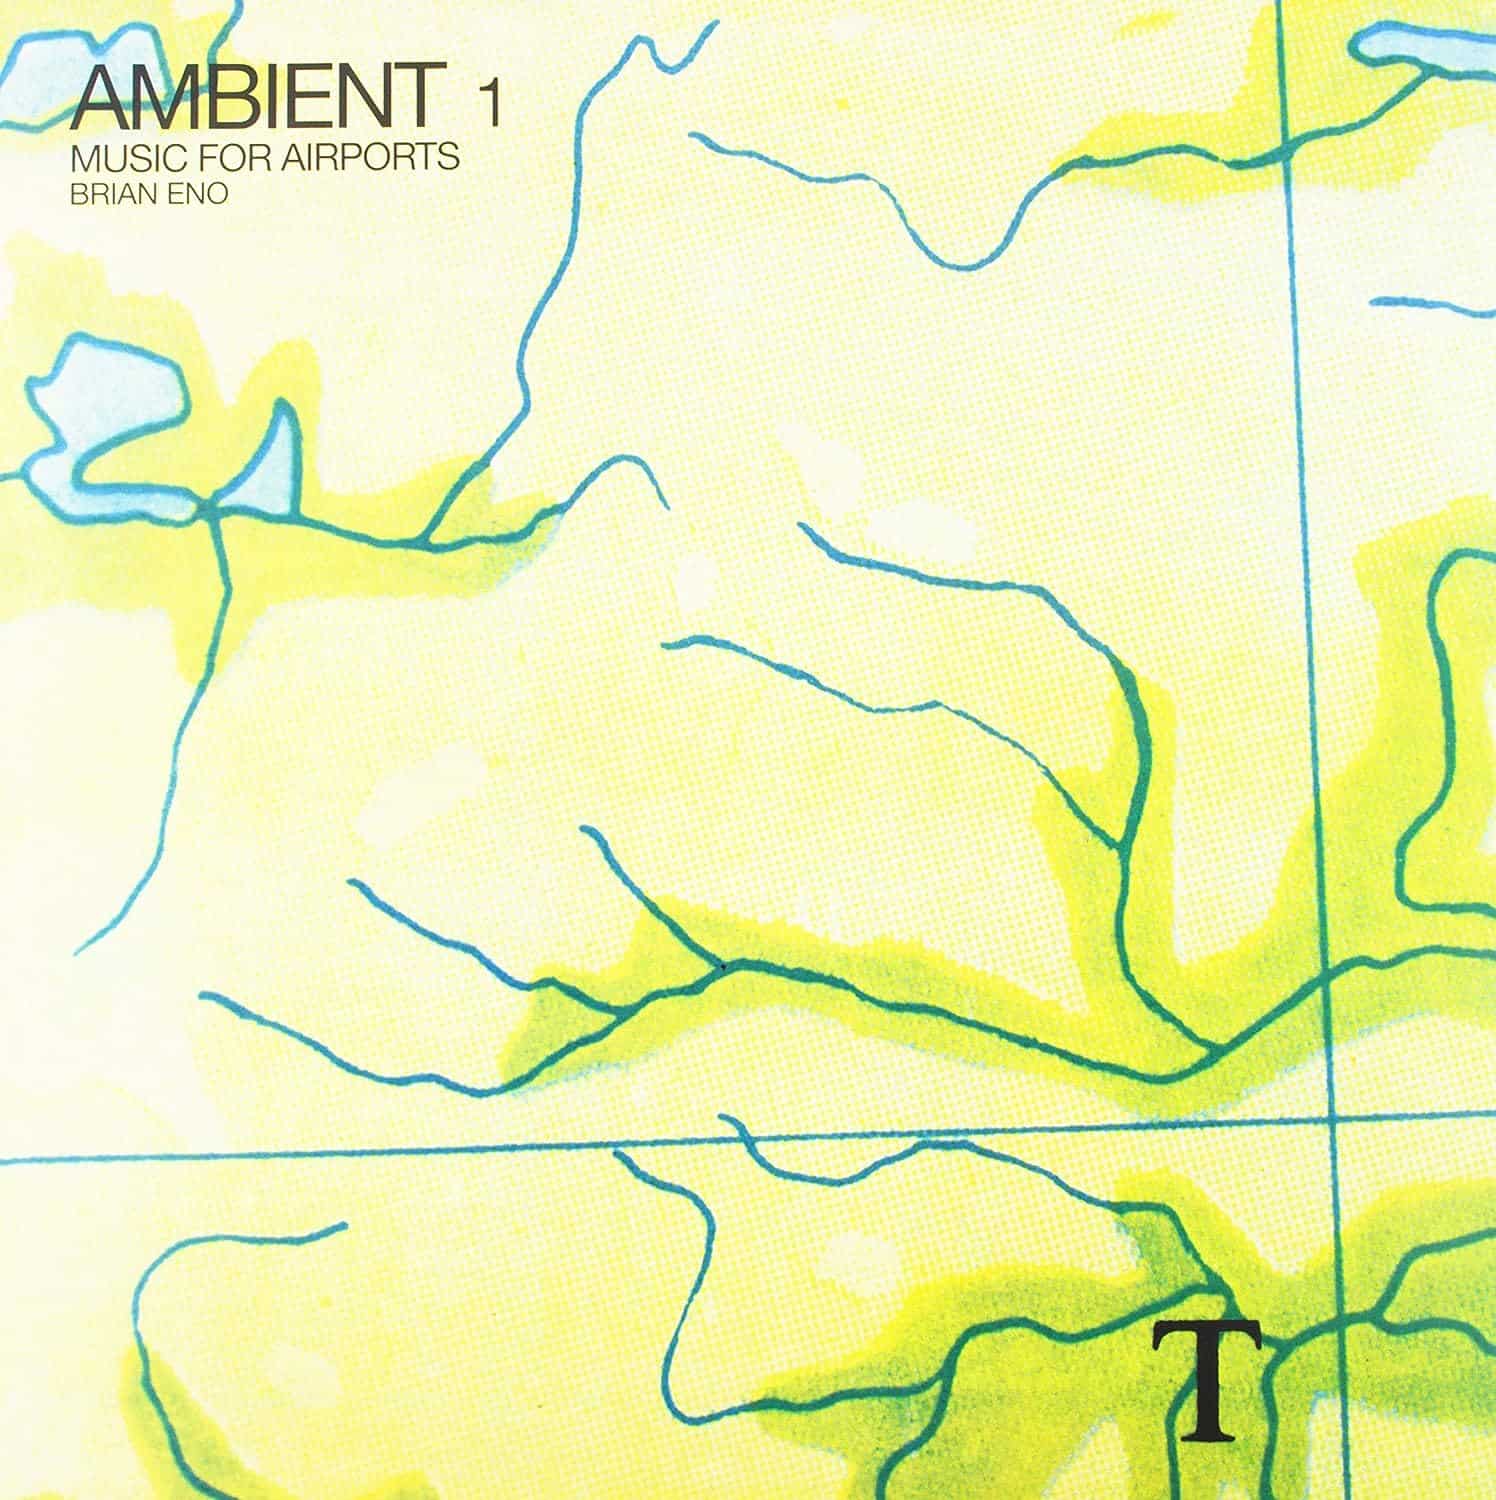 Brian Eno's first Ambient album, released in 1978